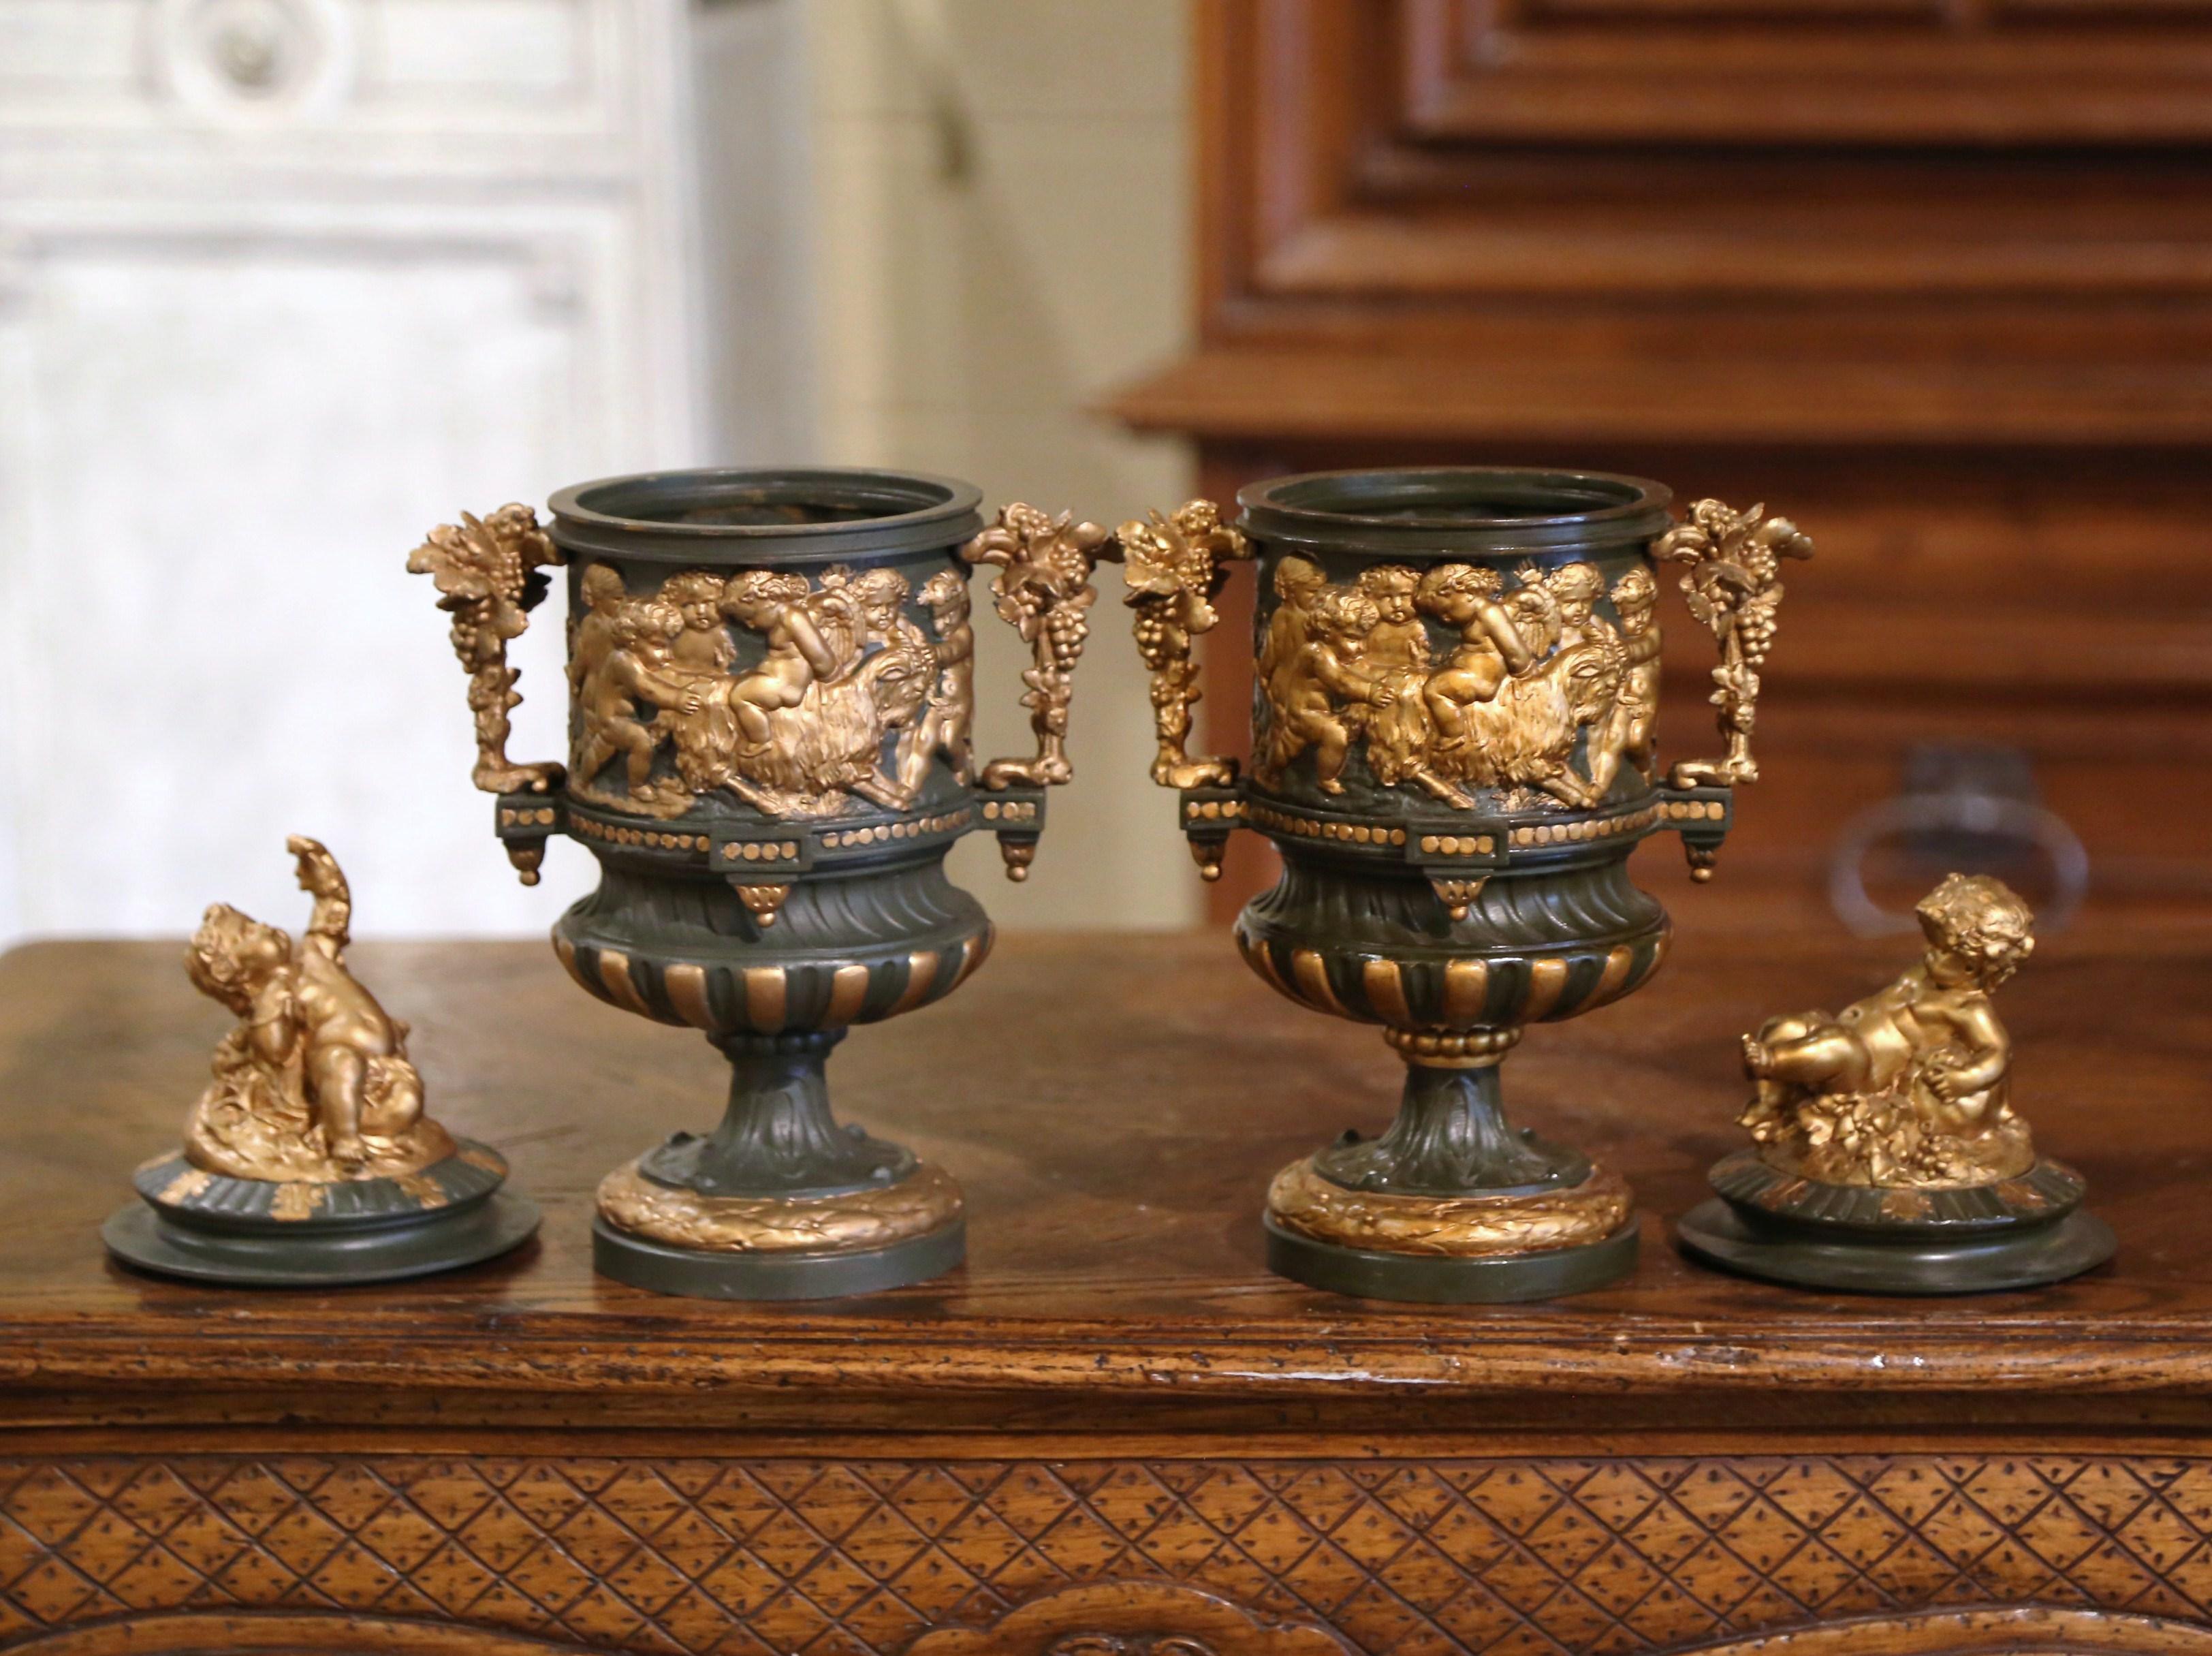 Crafted in France circa 1880 in the neoclassical style, these colorful antique urns have a truly elegant style. Each bronze vase stands on a circular base over a circular foot; the removable lid features a young Bacchus seated on vine and leaves